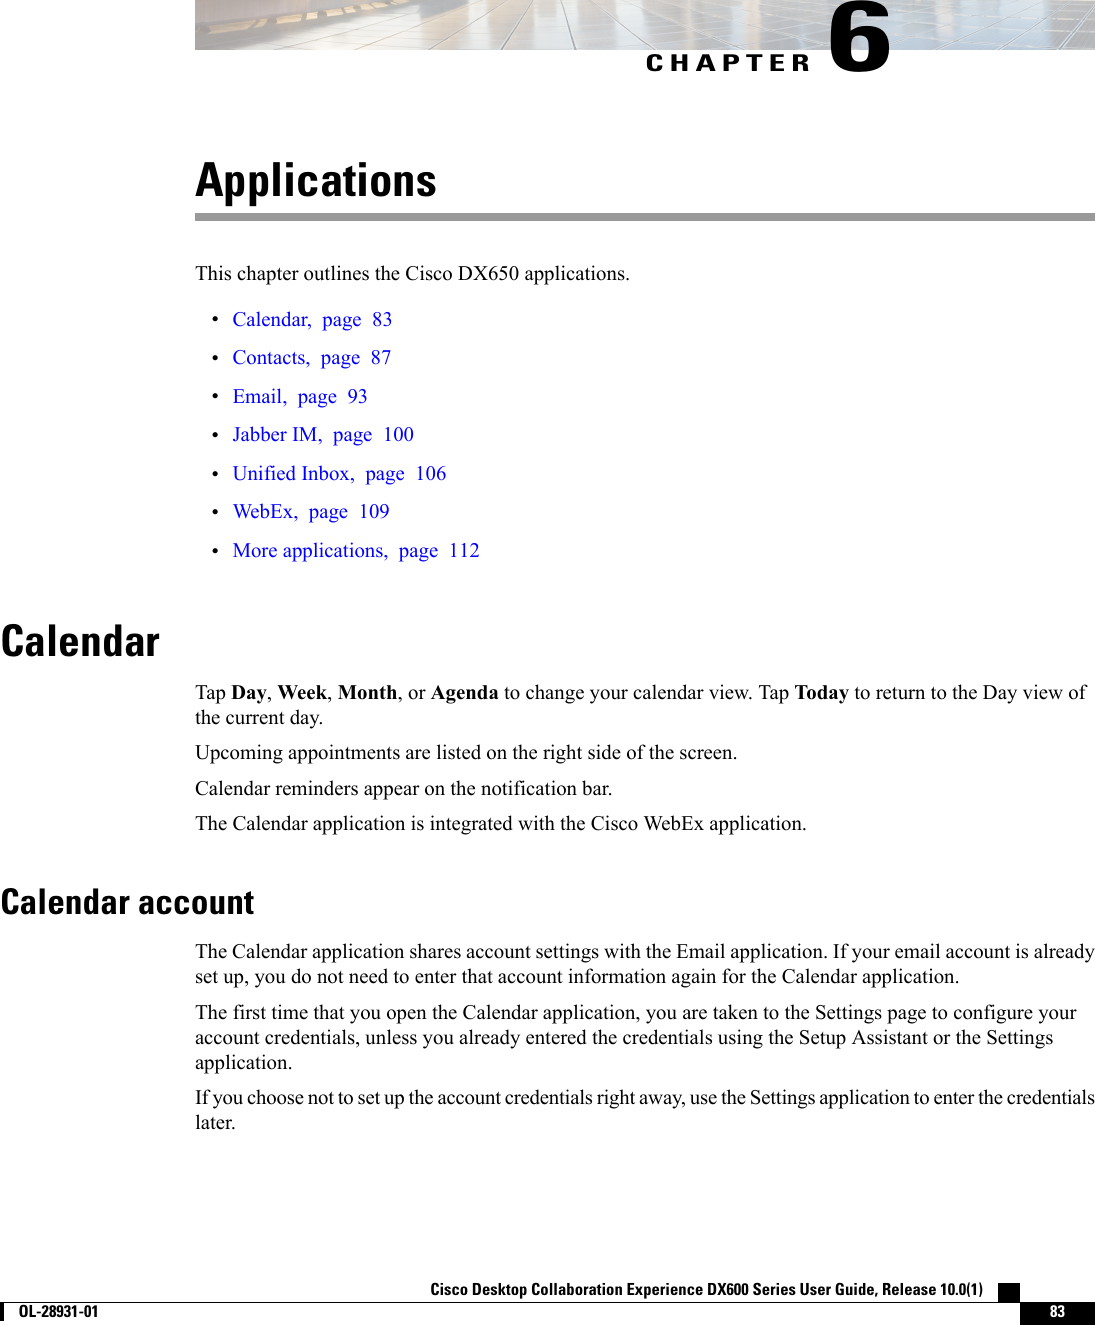 CHAPTER 6ApplicationsThis chapter outlines the Cisco DX650 applications.•Calendar, page 83•Contacts, page 87•Email, page 93•Jabber IM, page 100•Unified Inbox, page 106•WebEx, page 109•More applications, page 112CalendarTap Day,Week,Month, or Agenda to change your calendar view. Tap Today to return to the Day view ofthe current day.Upcoming appointments are listed on the right side of the screen.Calendar reminders appear on the notification bar.The Calendar application is integrated with the Cisco WebEx application.Calendar accountThe Calendar application shares account settings with the Email application. If your email account is alreadyset up, you do not need to enter that account information again for the Calendar application.The first time that you open the Calendar application, you are taken to the Settings page to configure youraccount credentials, unless you already entered the credentials using the Setup Assistant or the Settingsapplication.If you choose not to set up the account credentials right away, use the Settings application to enter the credentialslater.Cisco Desktop Collaboration Experience DX600 Series User Guide, Release 10.0(1)        OL-28931-01 83